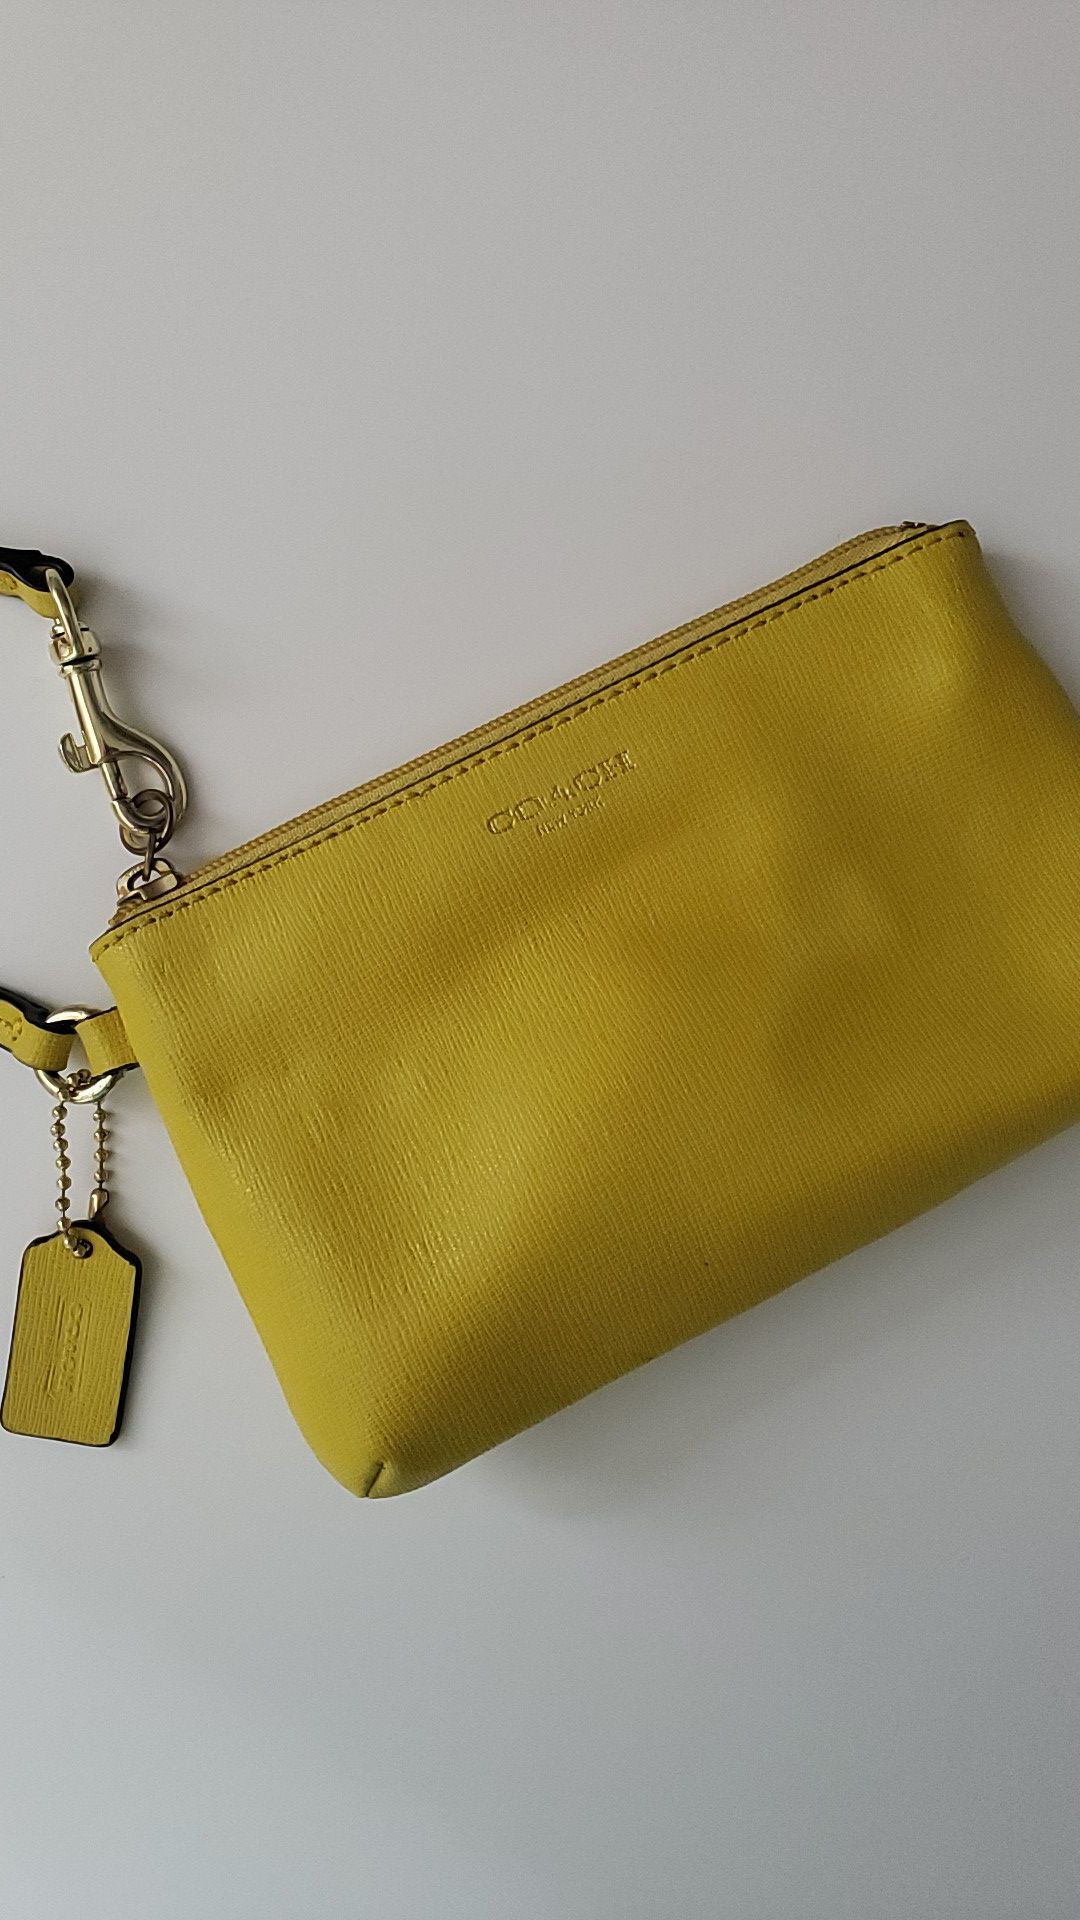 COACH Yellow wristlet AUTHENTIC GREAT condition